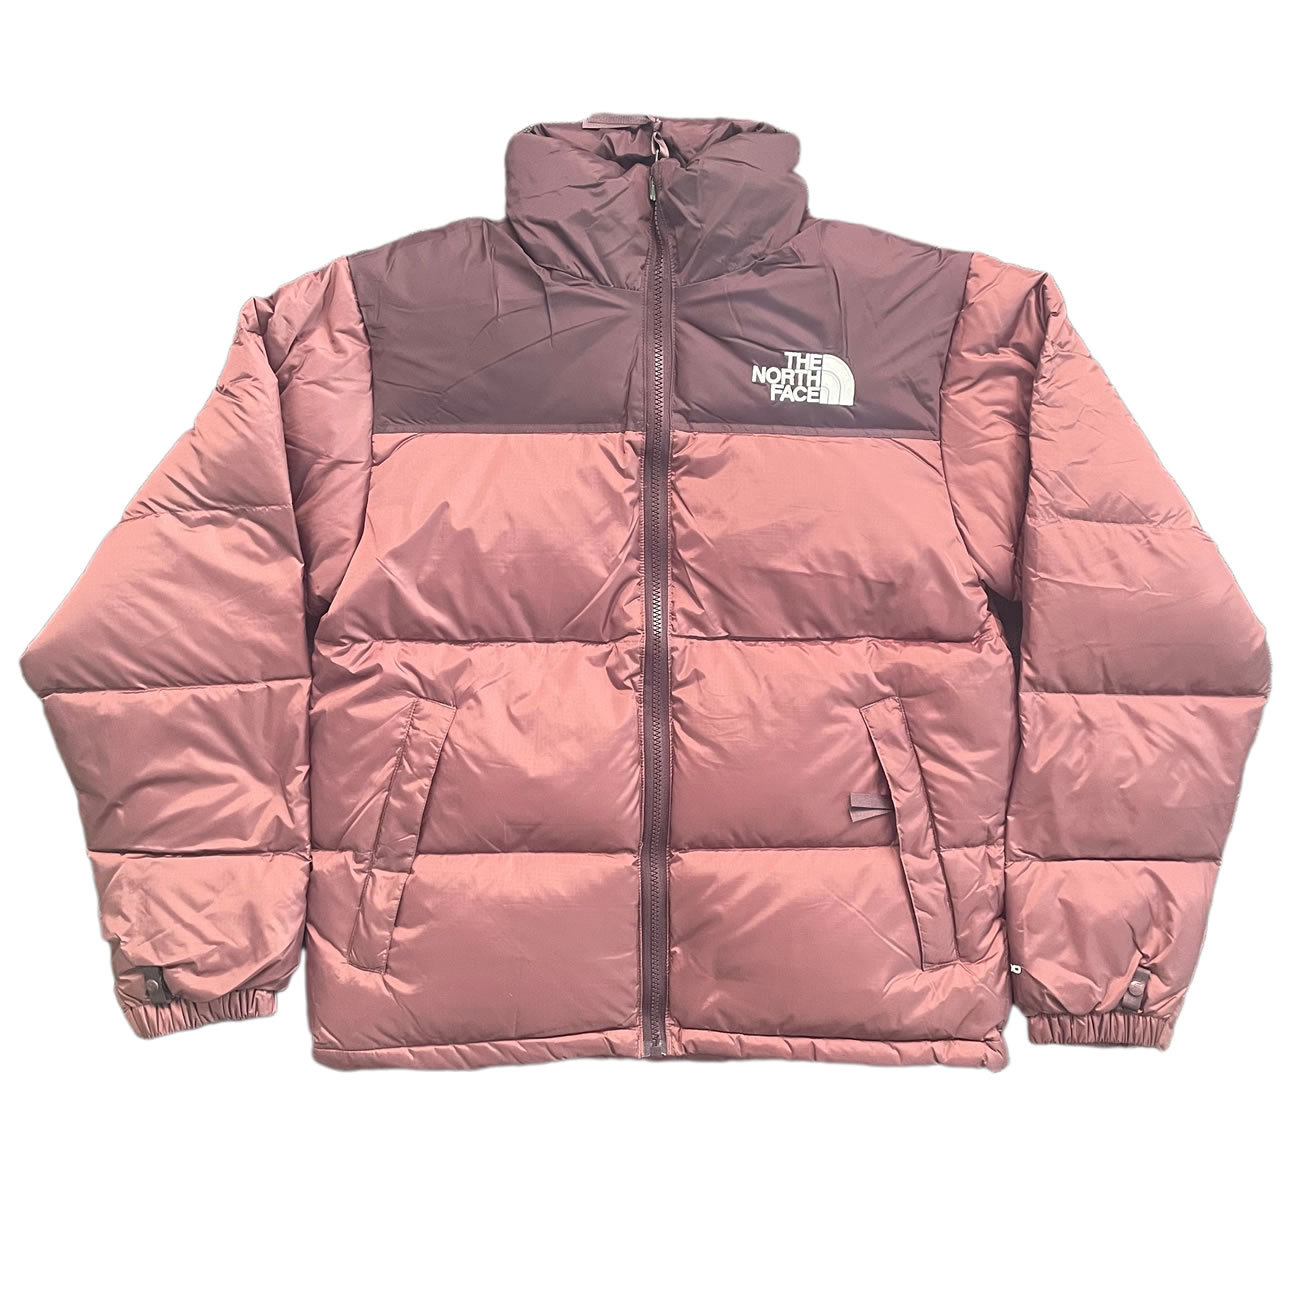 The North Face 1996 Retro Nuptse Packable Jacket FW21